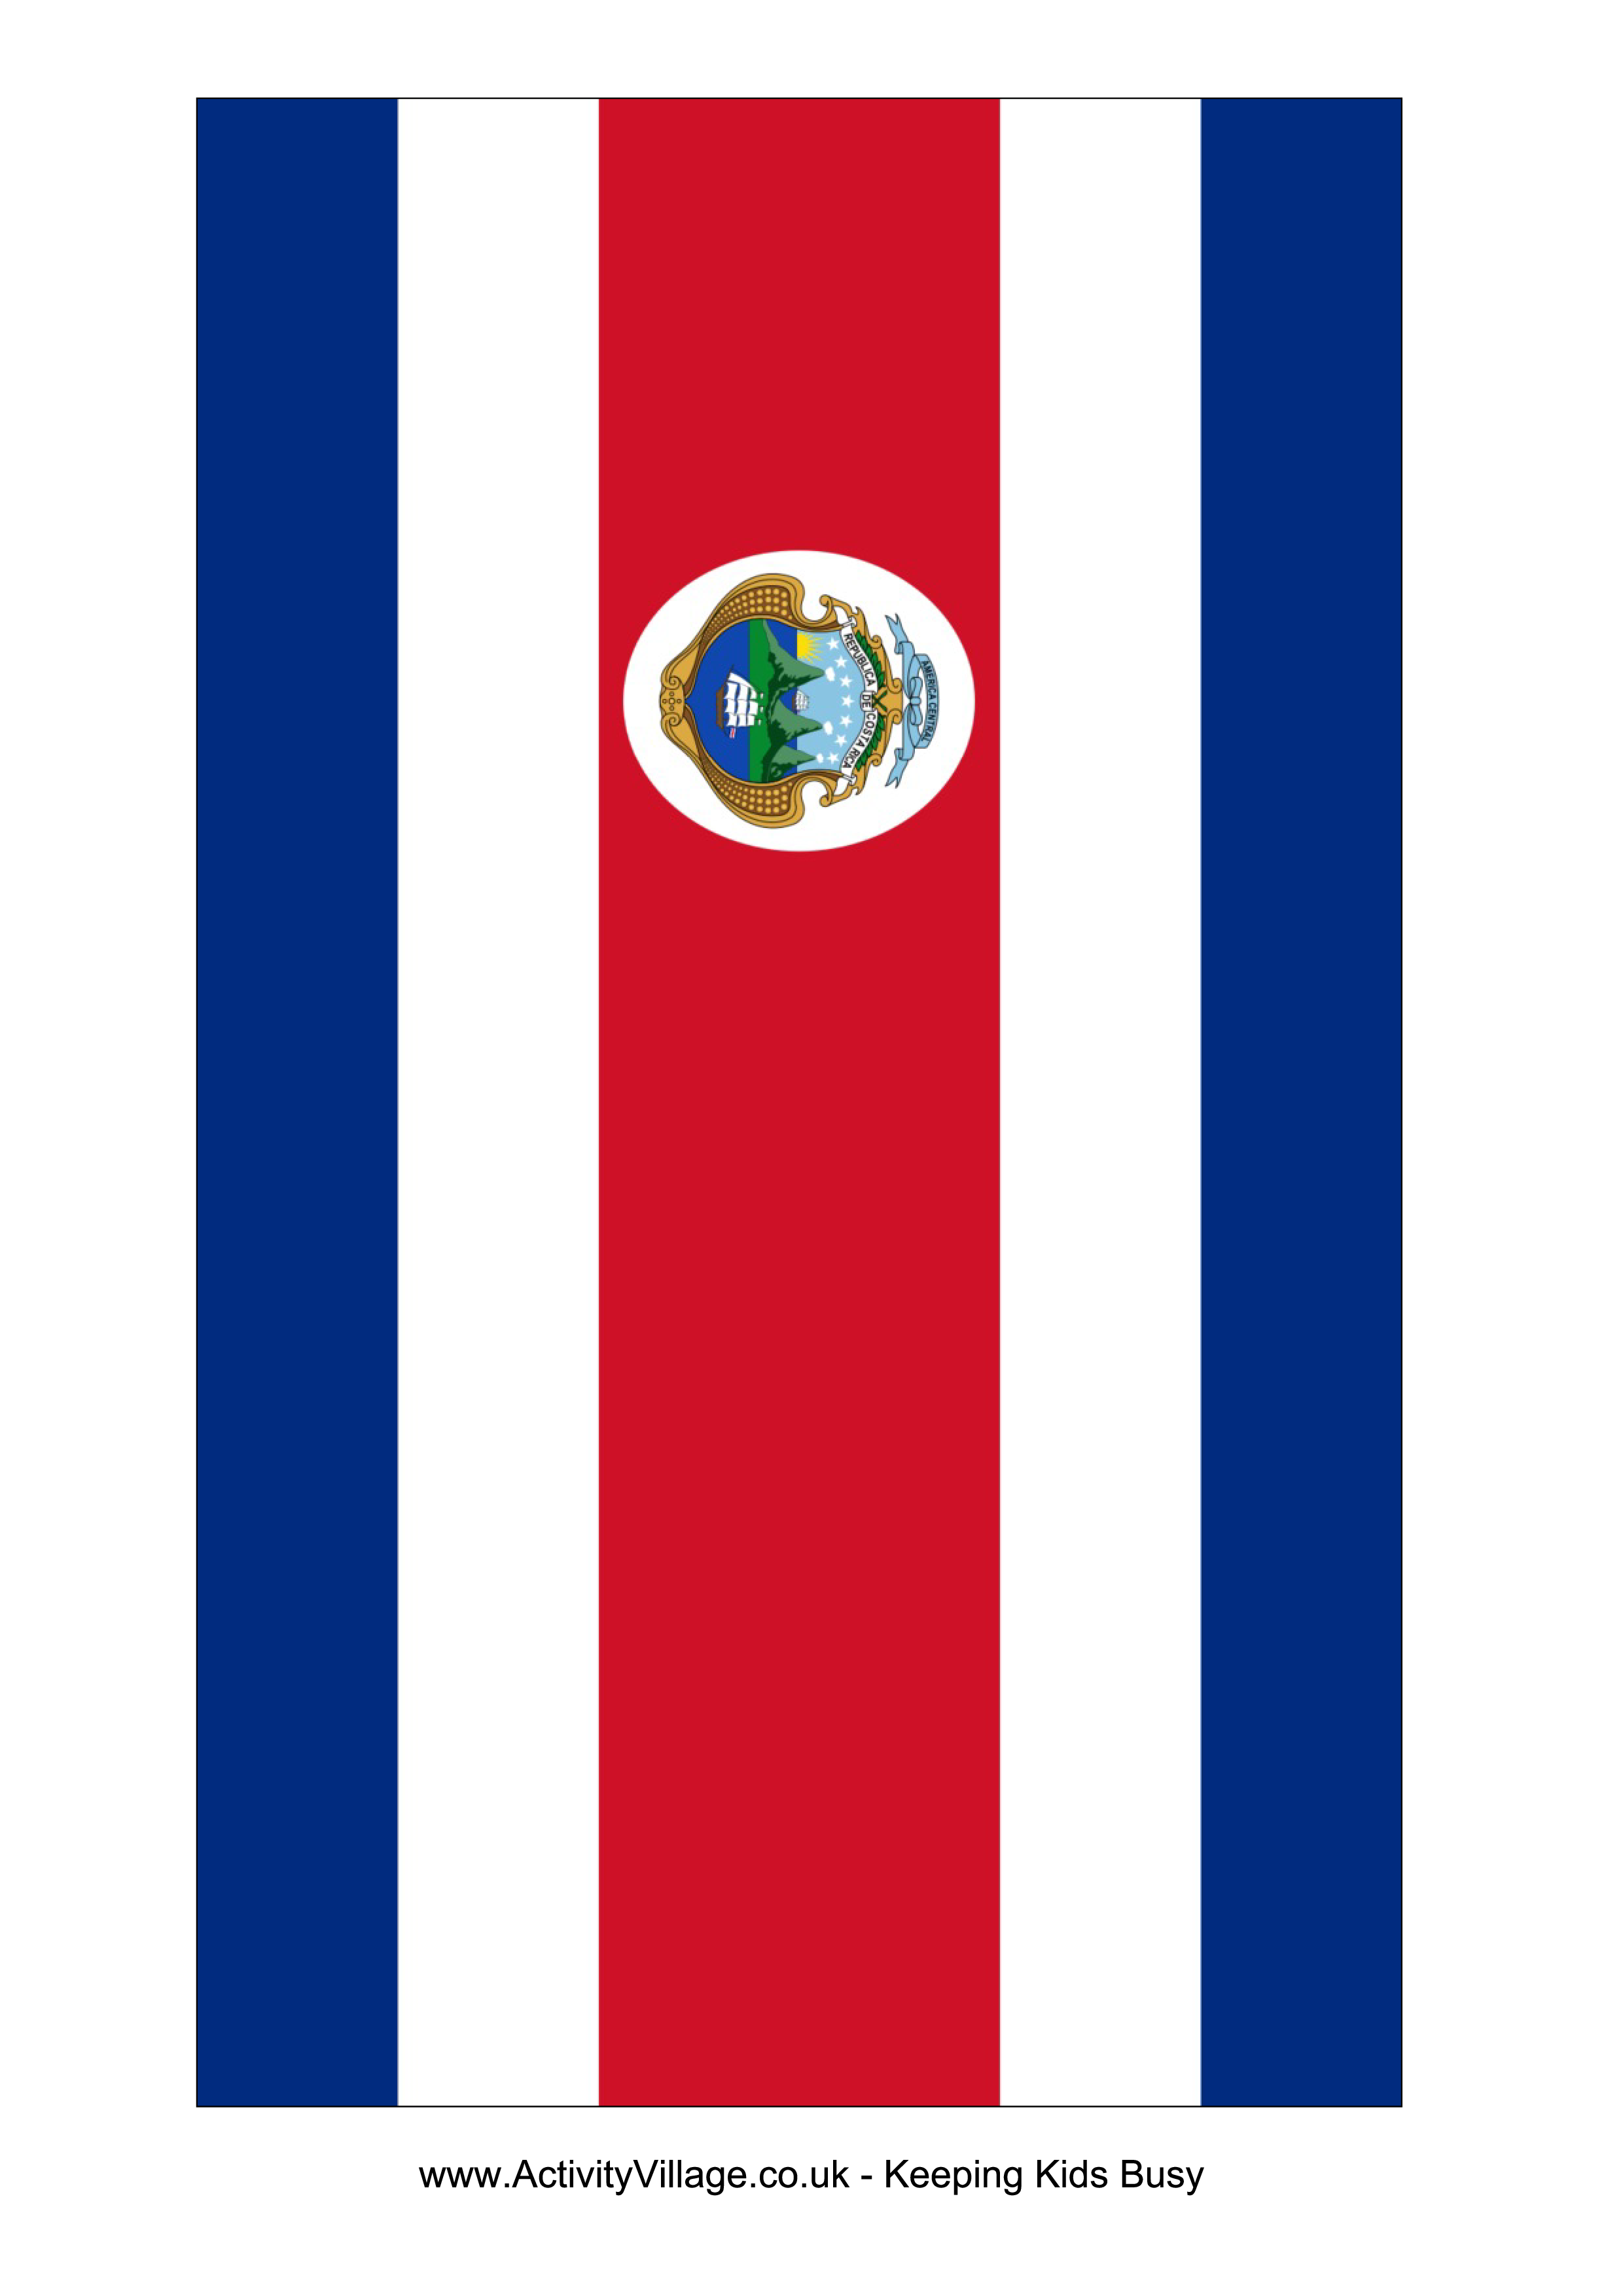 Costa Rica Flag PNG Free File Download